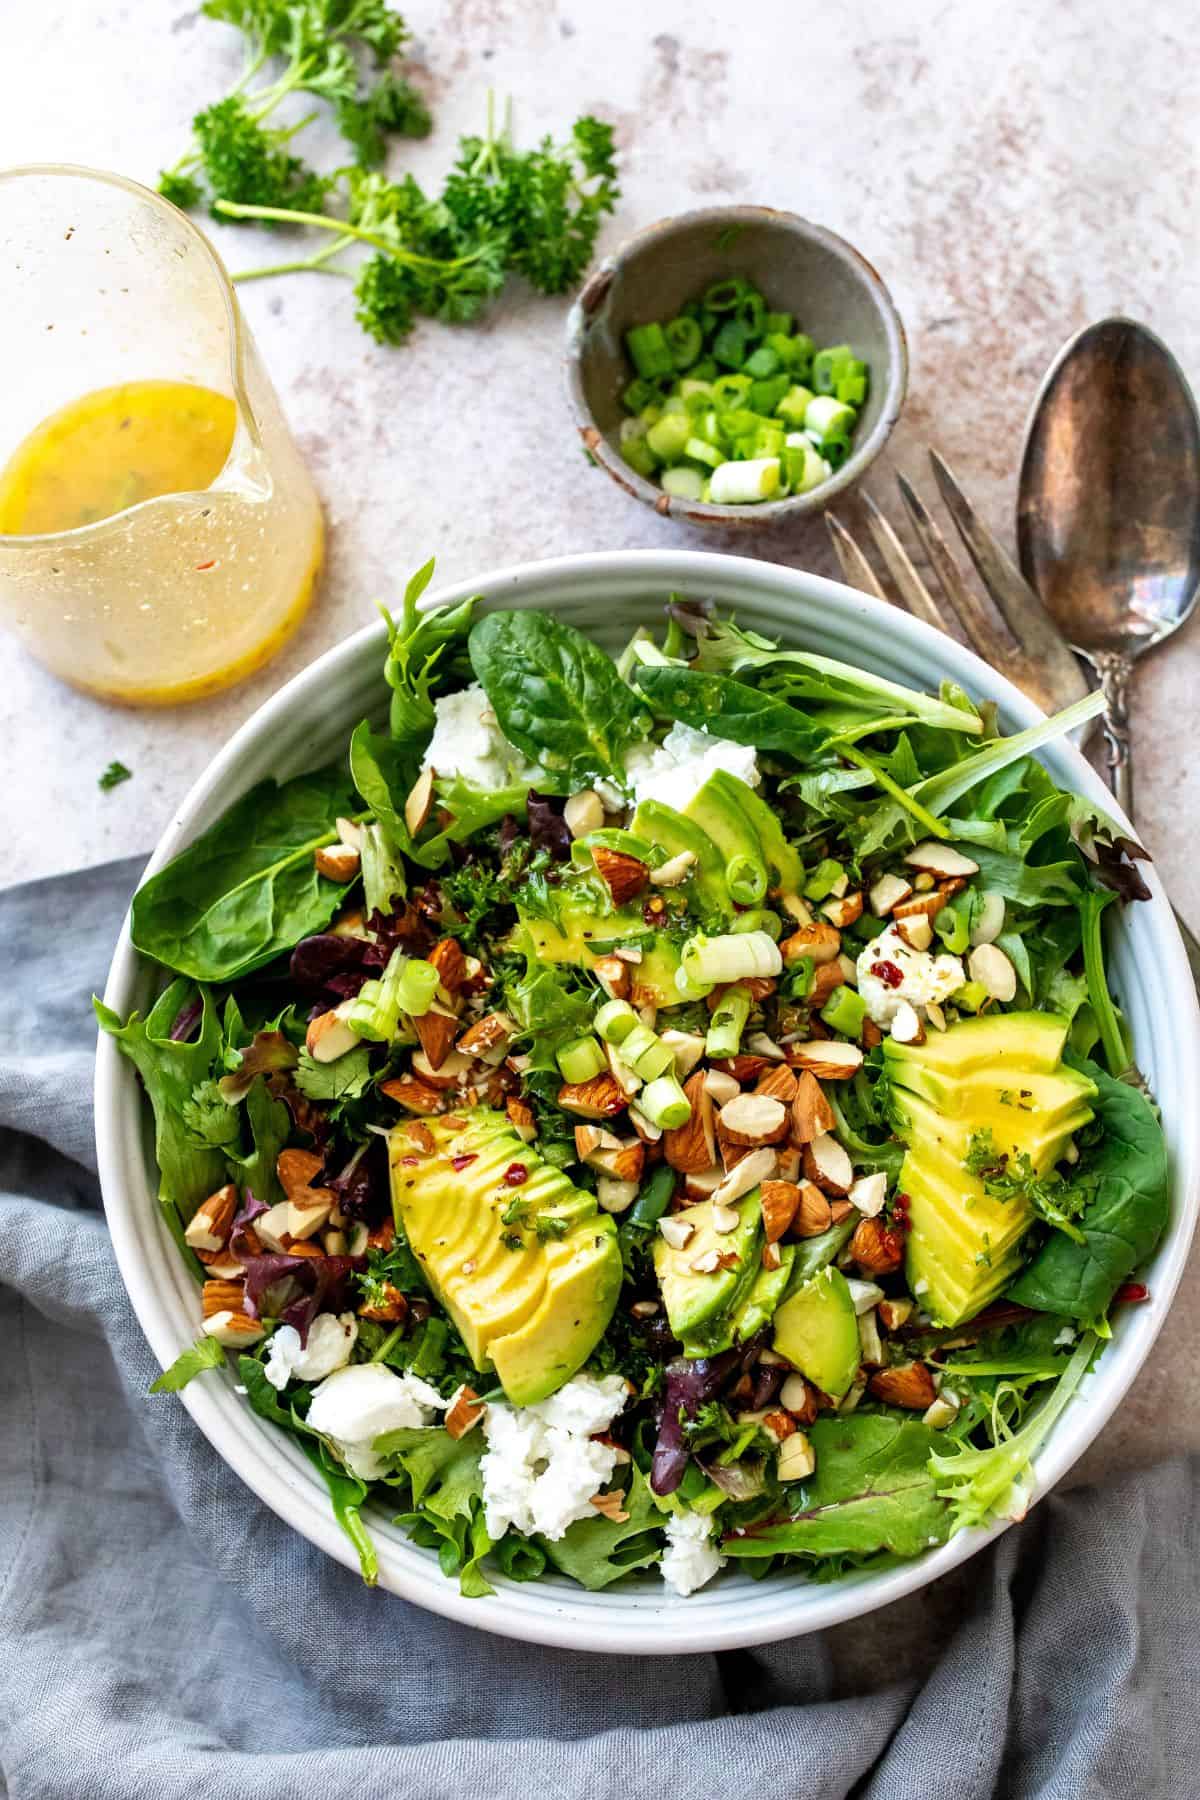 White bowl with mixed greens and avocado on top. Mixing utensils to the side. 